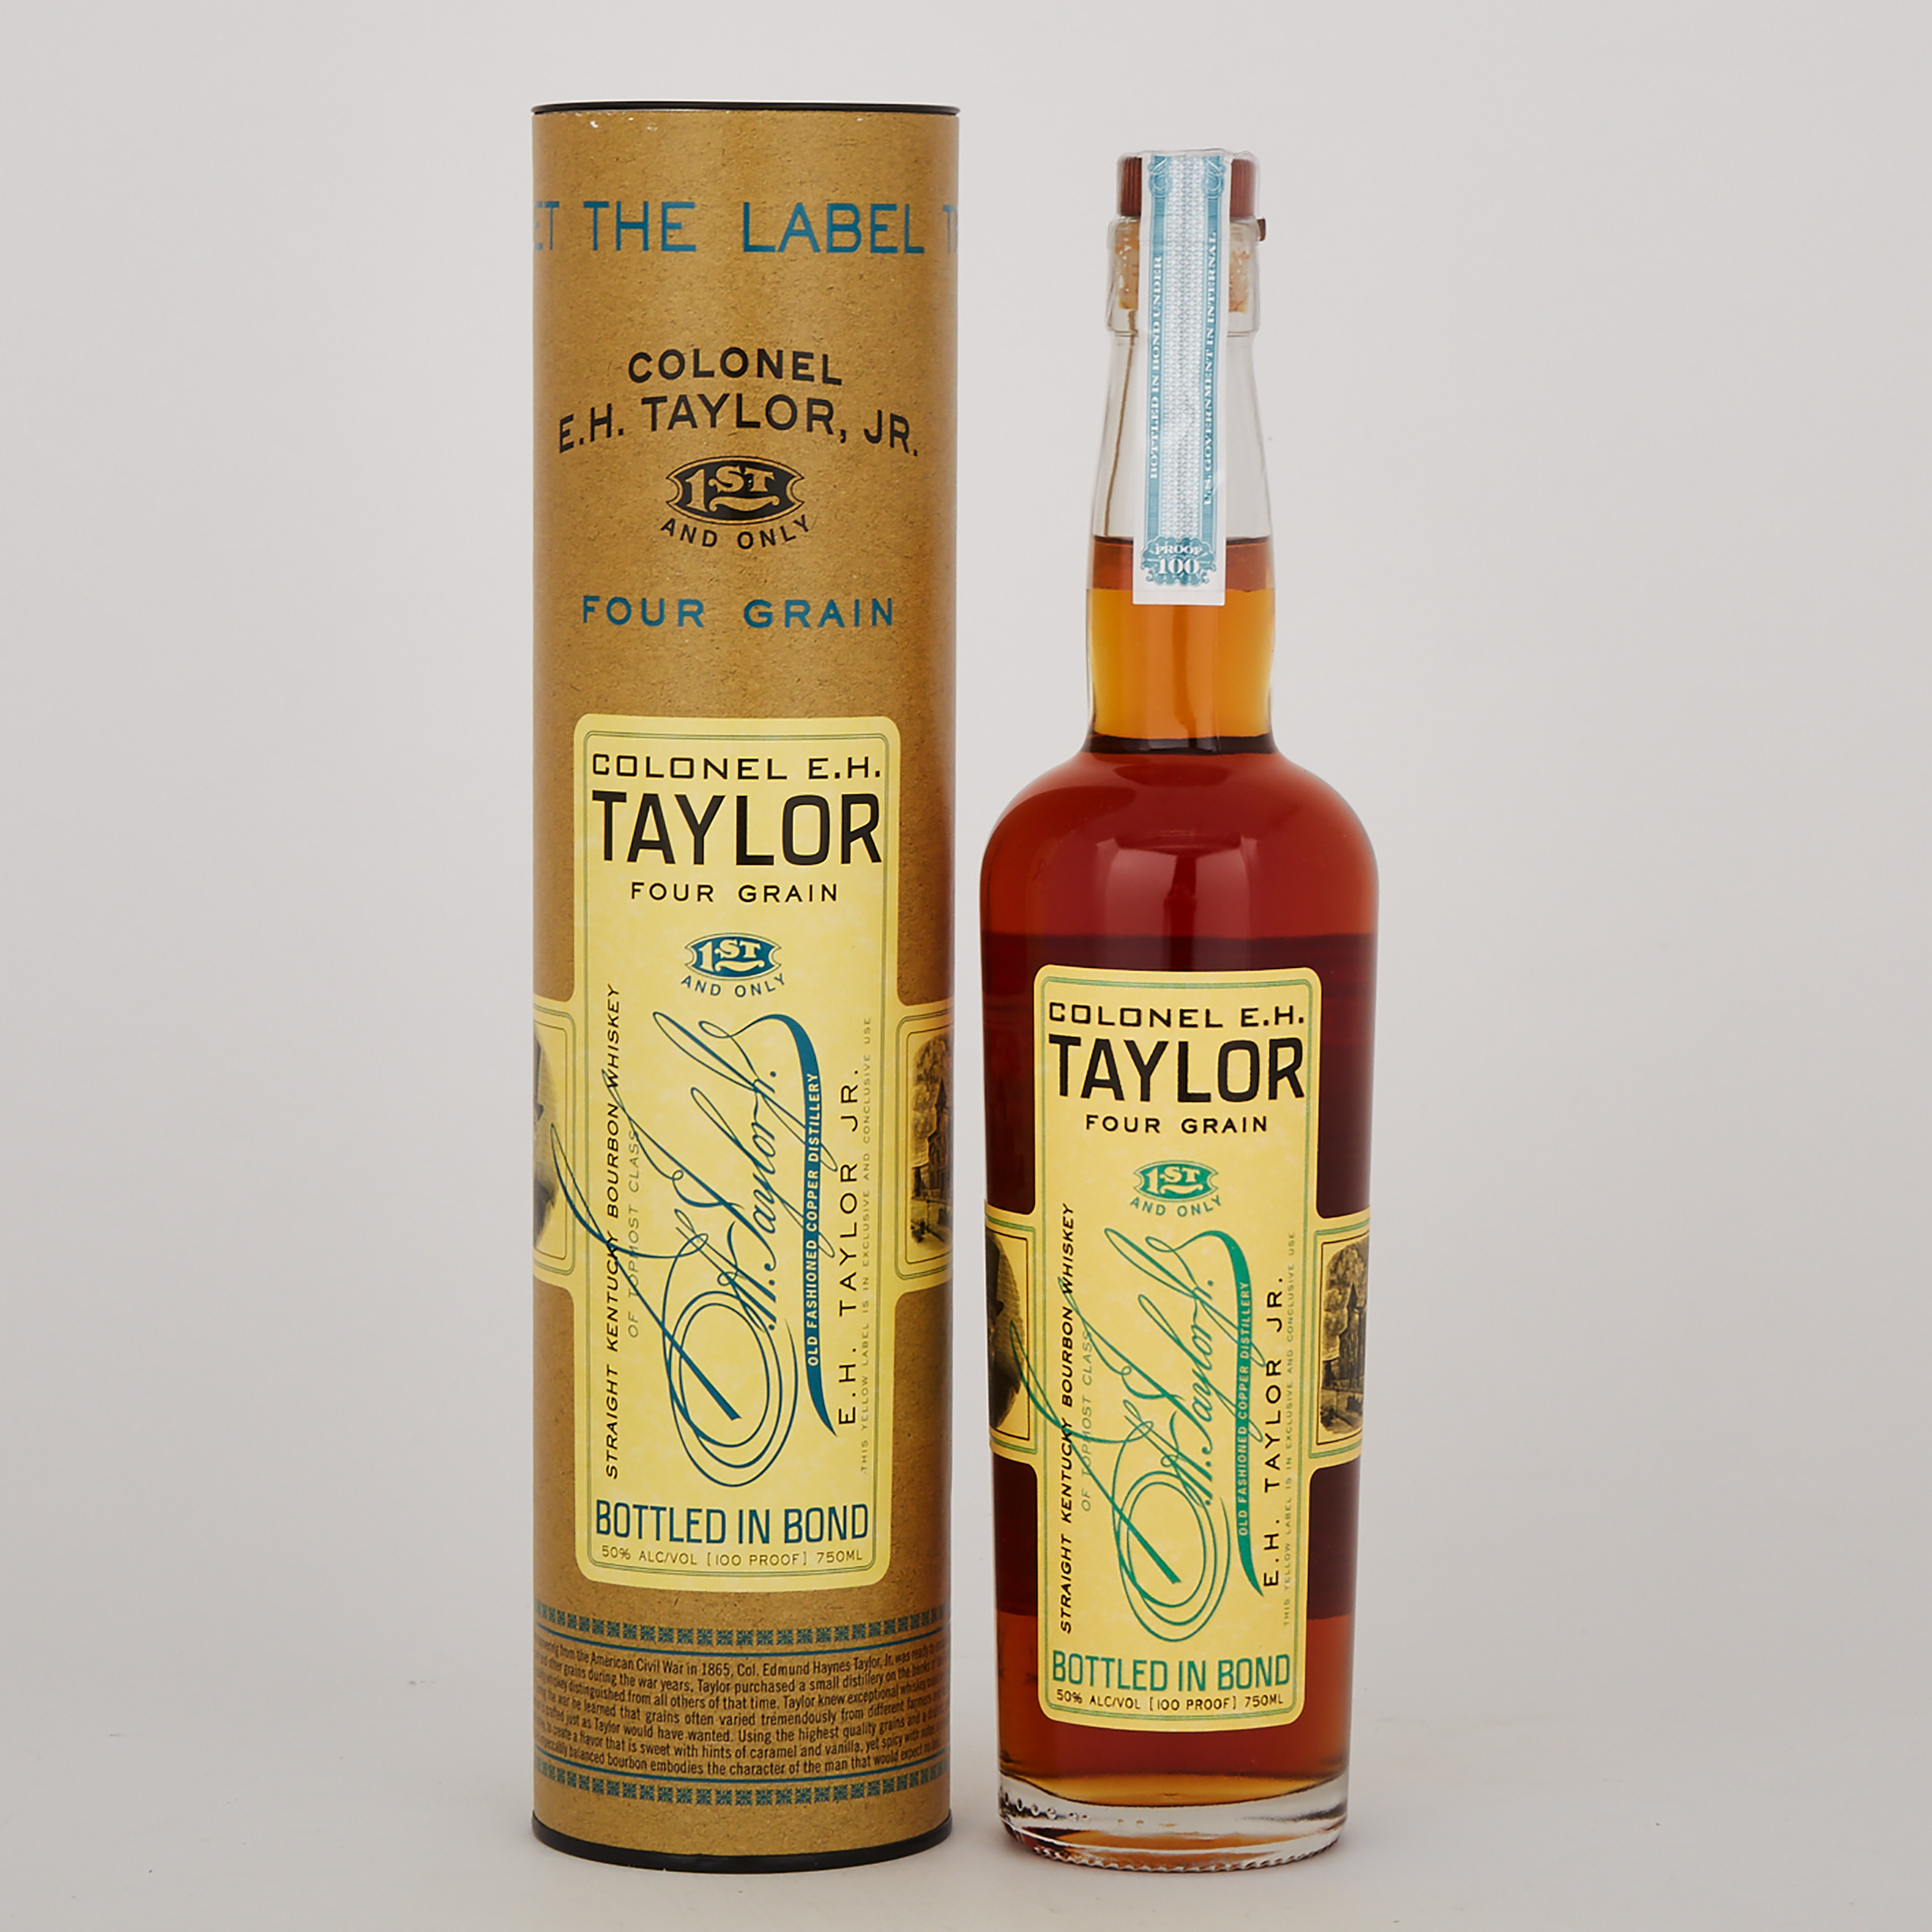 COLONEL E. H. TAYLOR JR. FOUR GRAIN STRAIGHT KENTUCKY BOURBON WHISKEY 12 YEARS (ONE 750 ML)